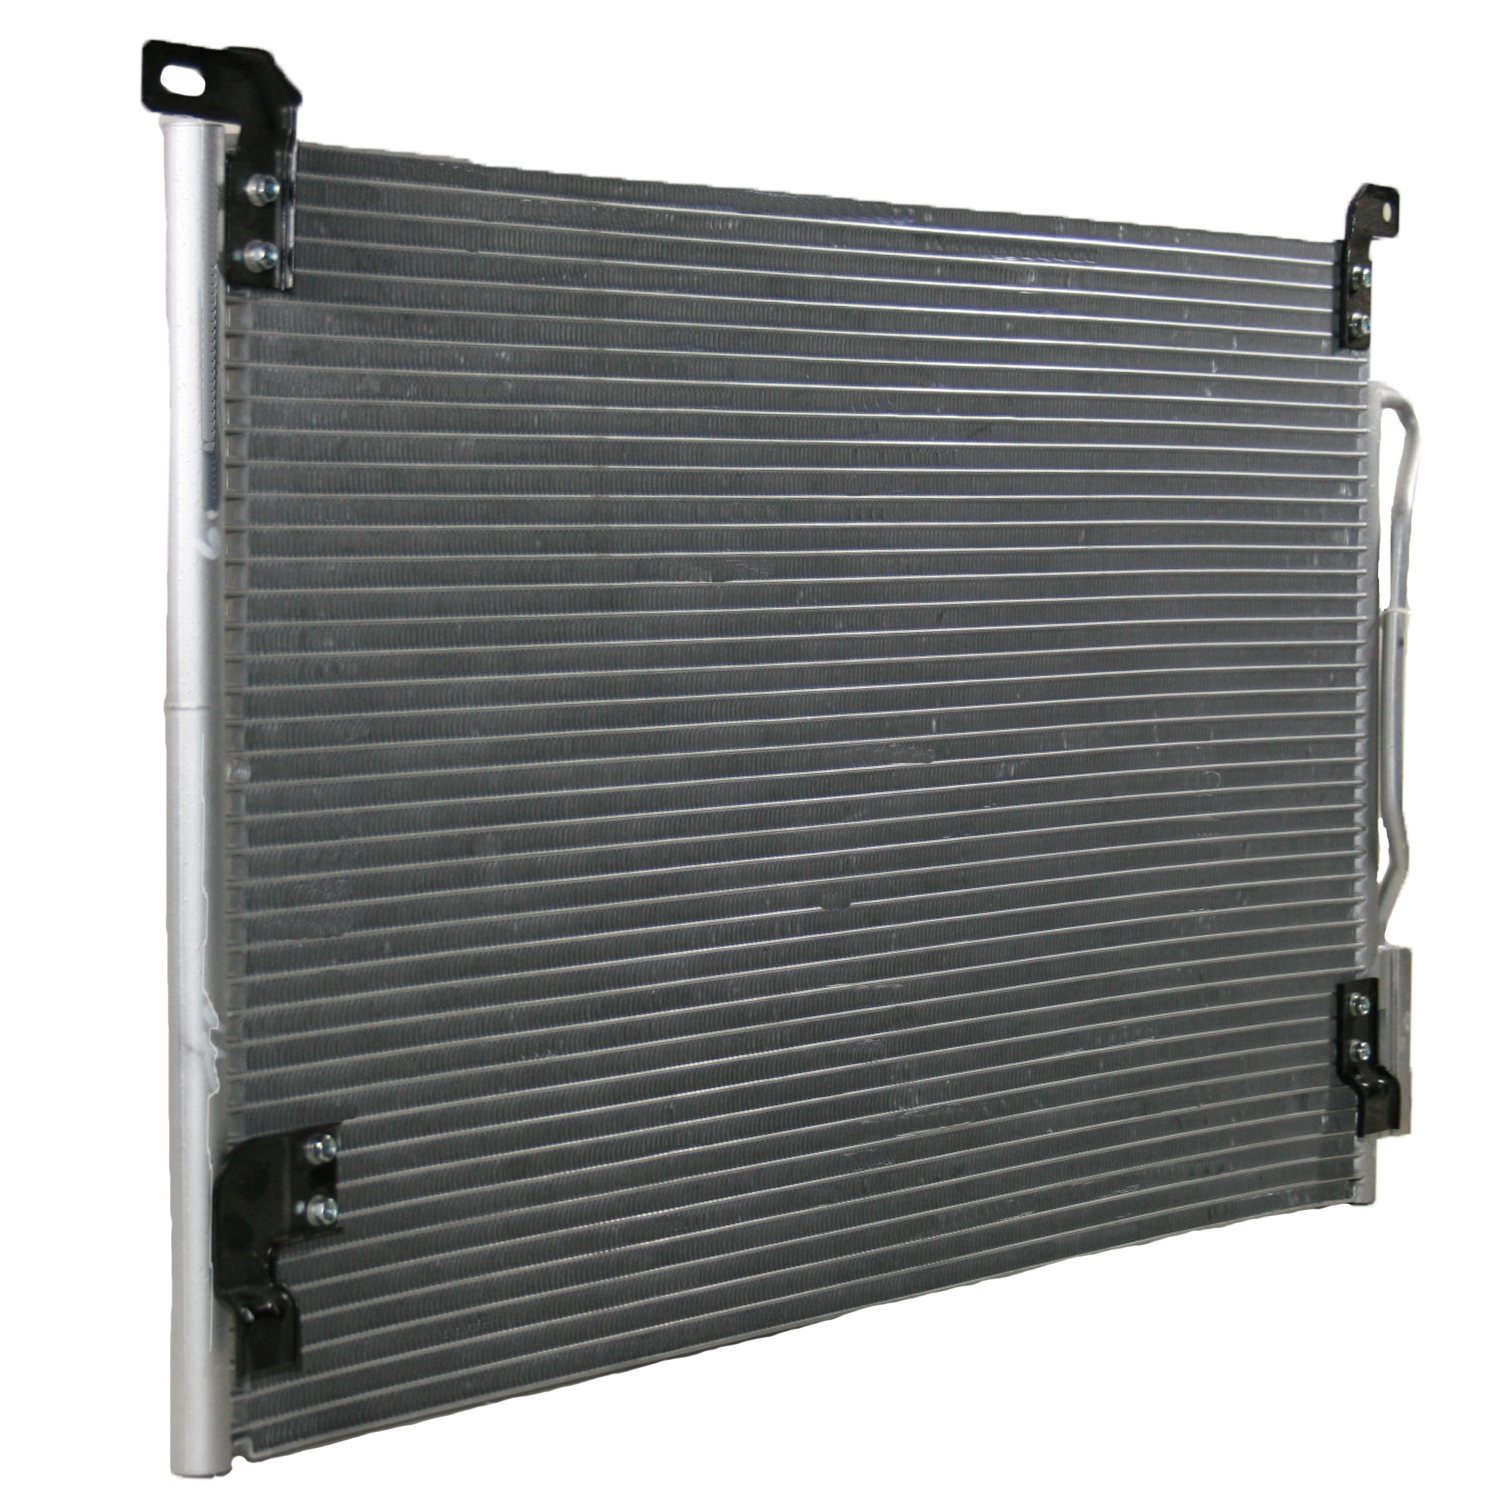 TCW Condenser 44-3573 New Product Image field_60b6a13a6e67c